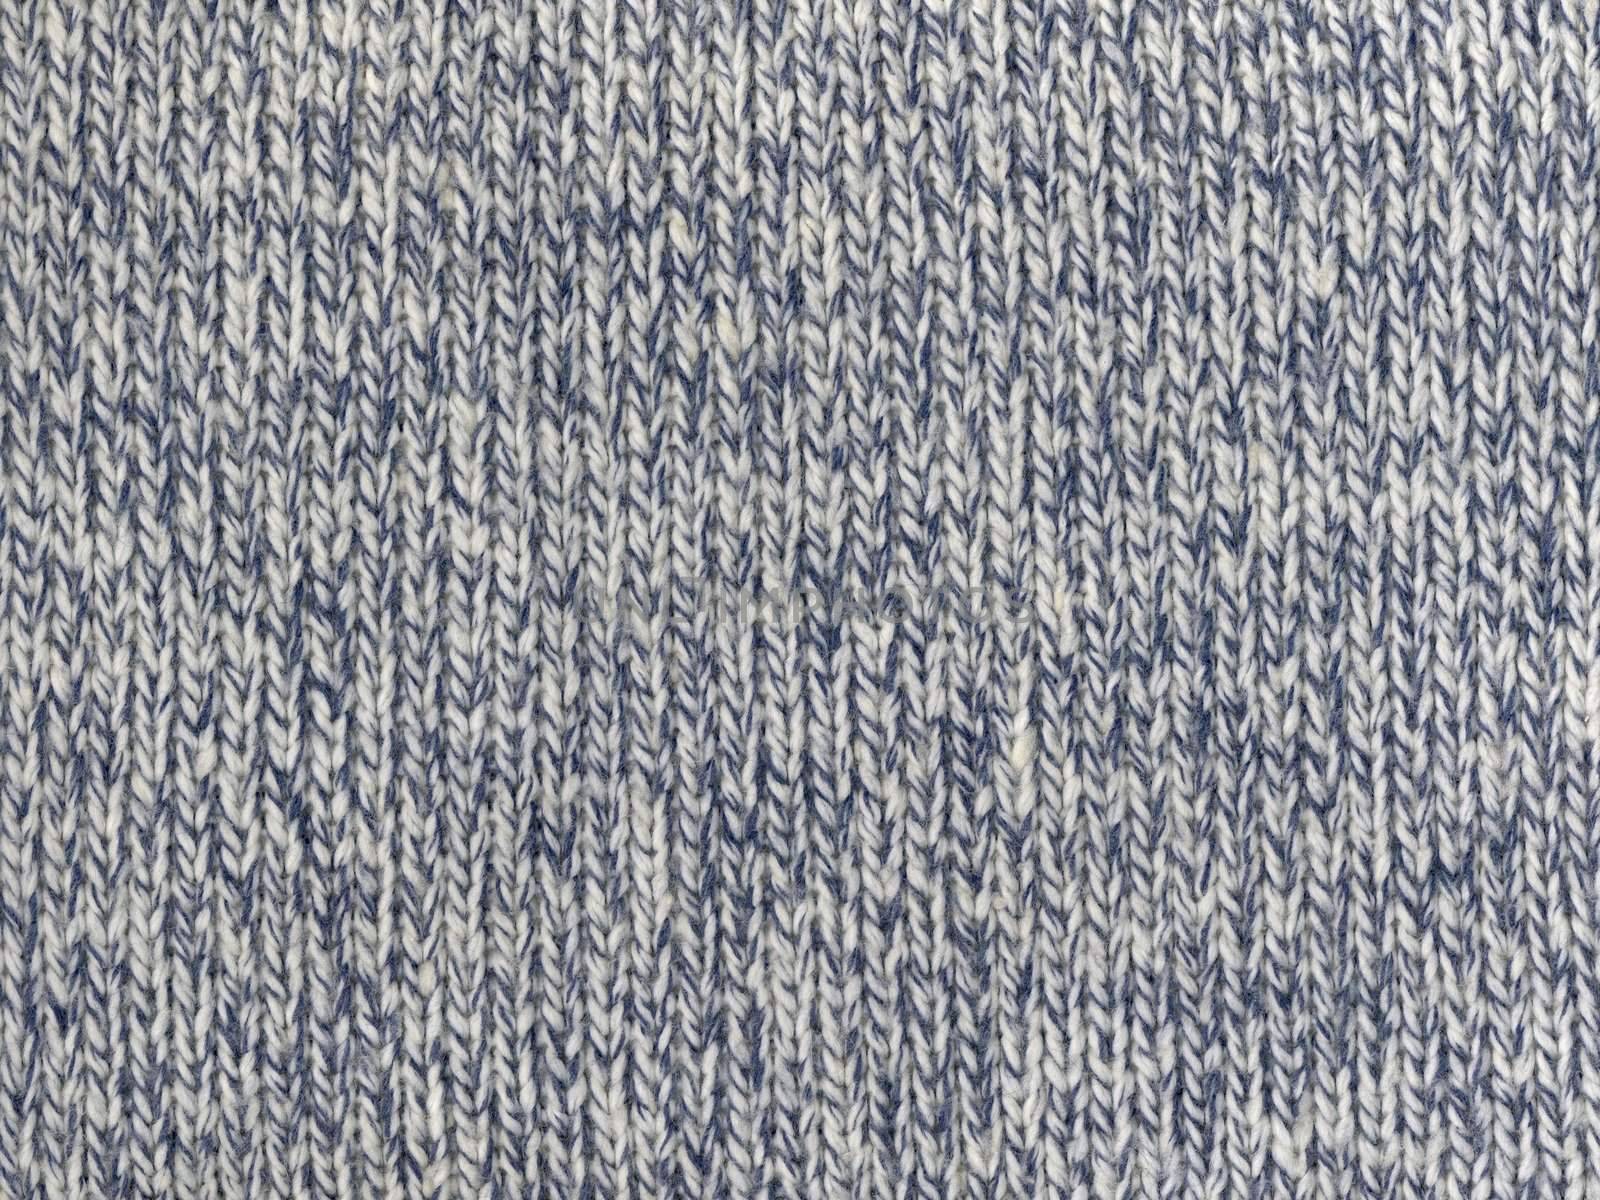 Sample of Rough Knitwear by Nonboe